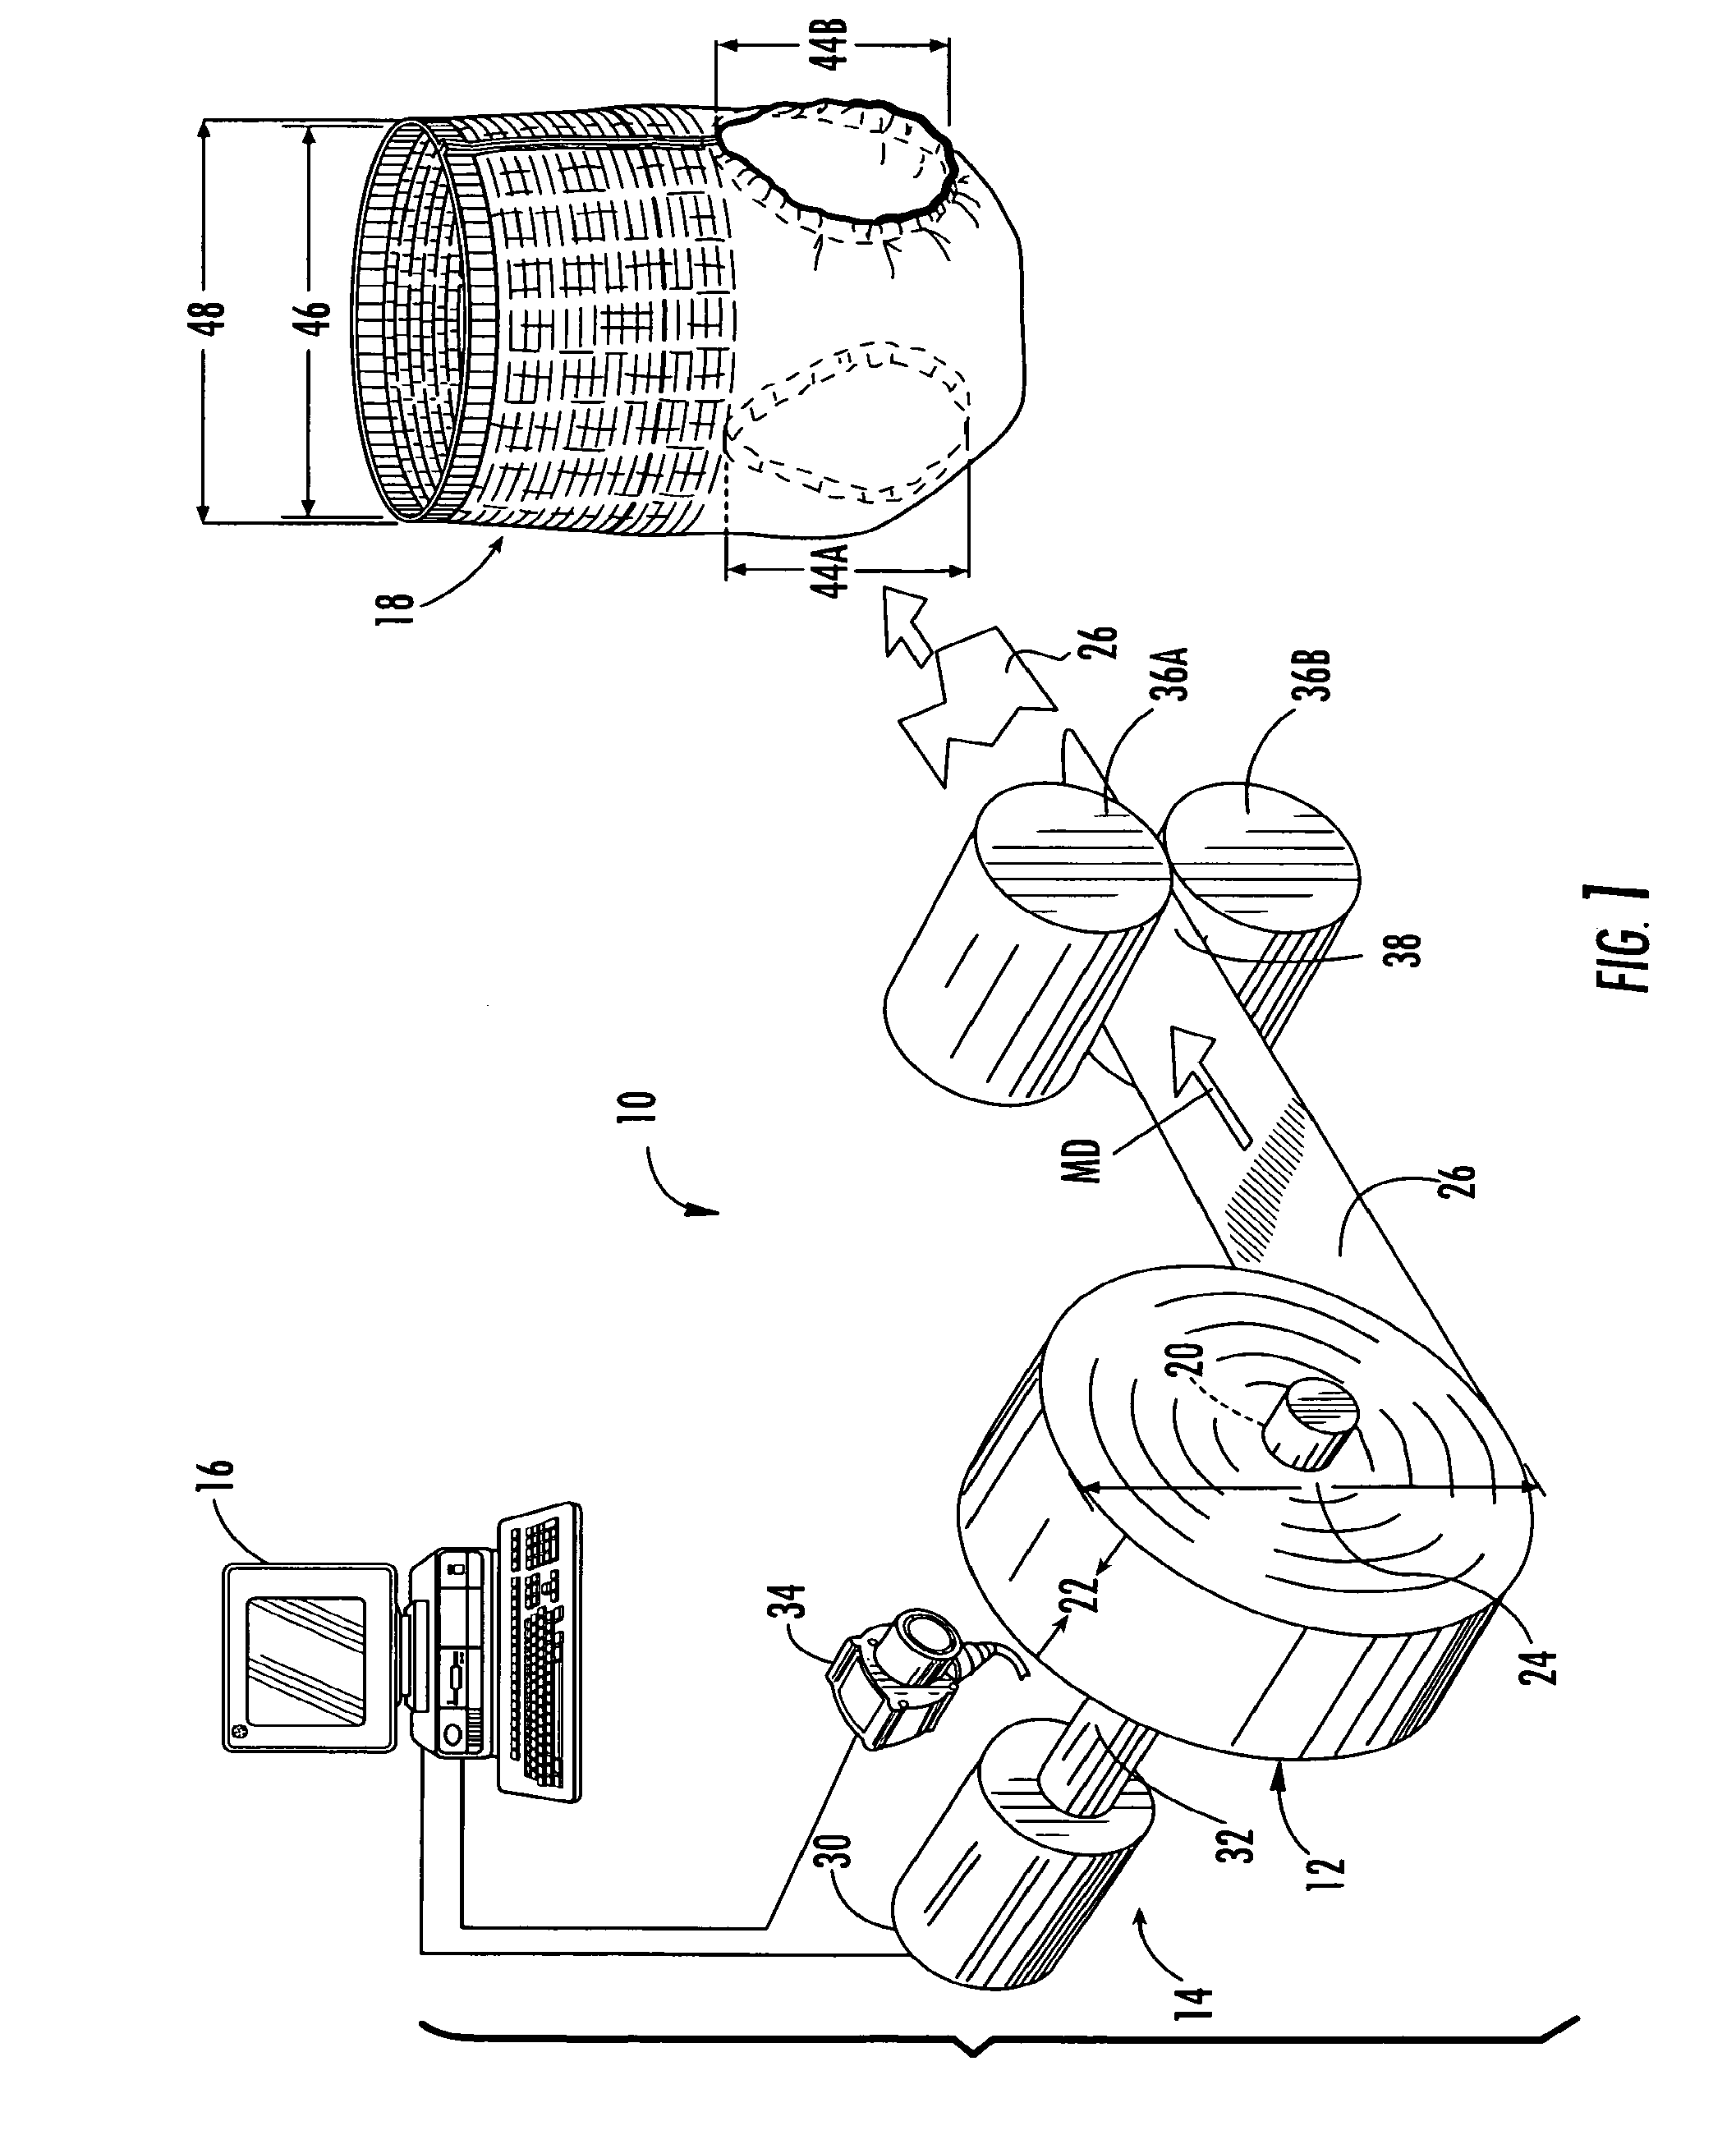 Through-roll profile unwind control system and method